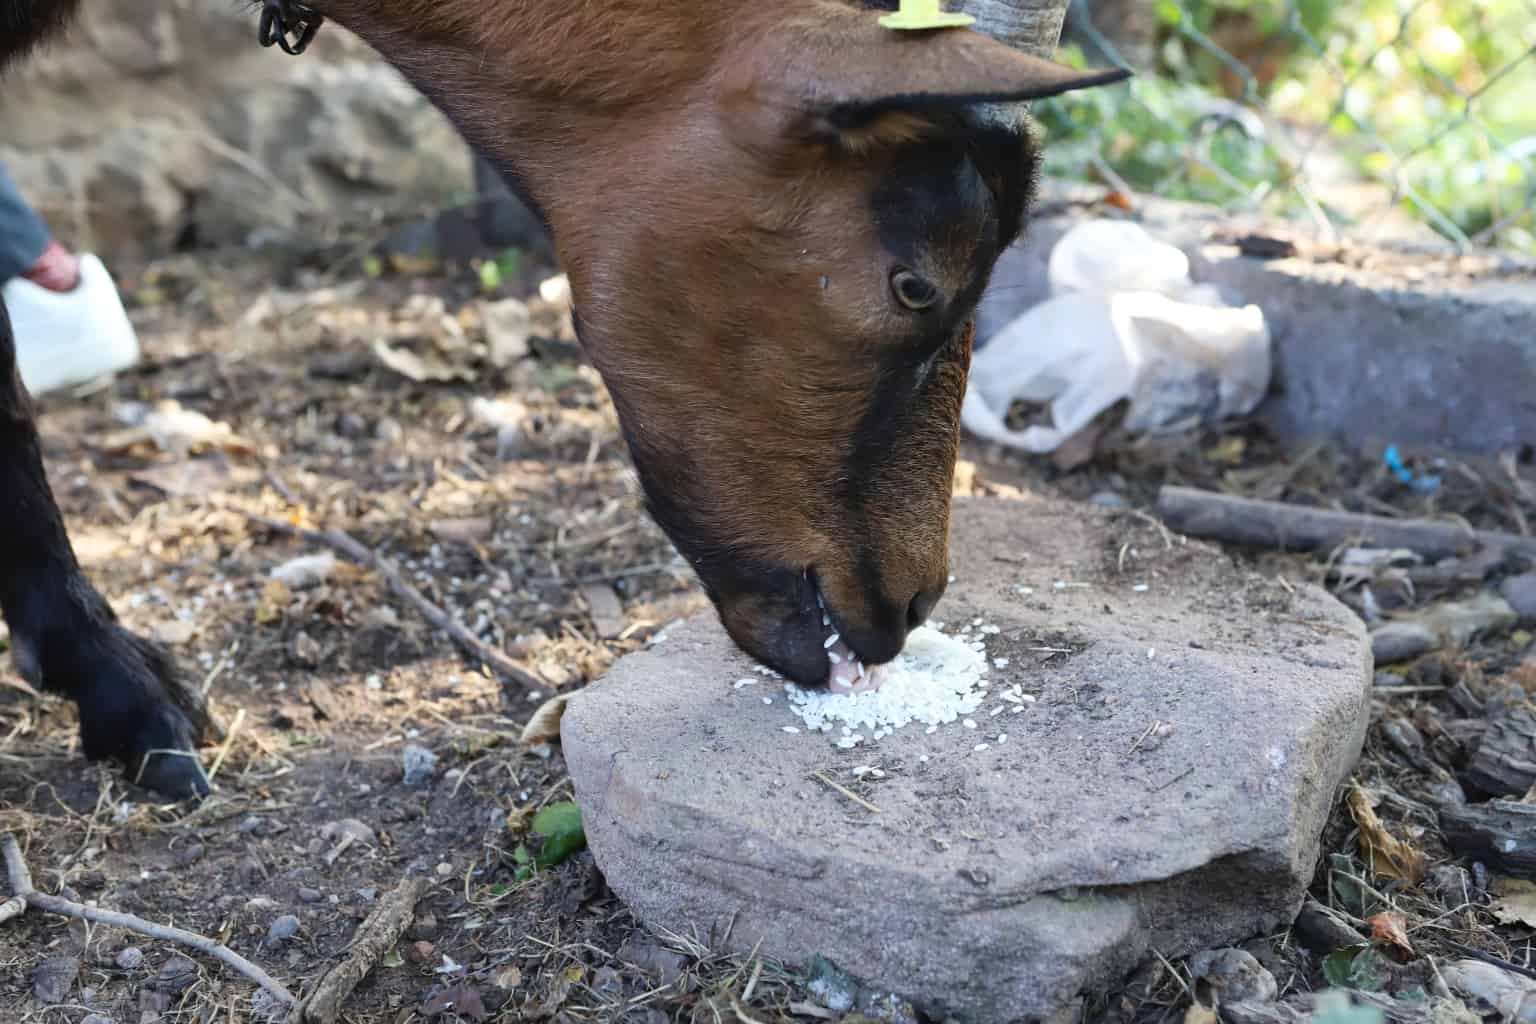 a goat eating rice